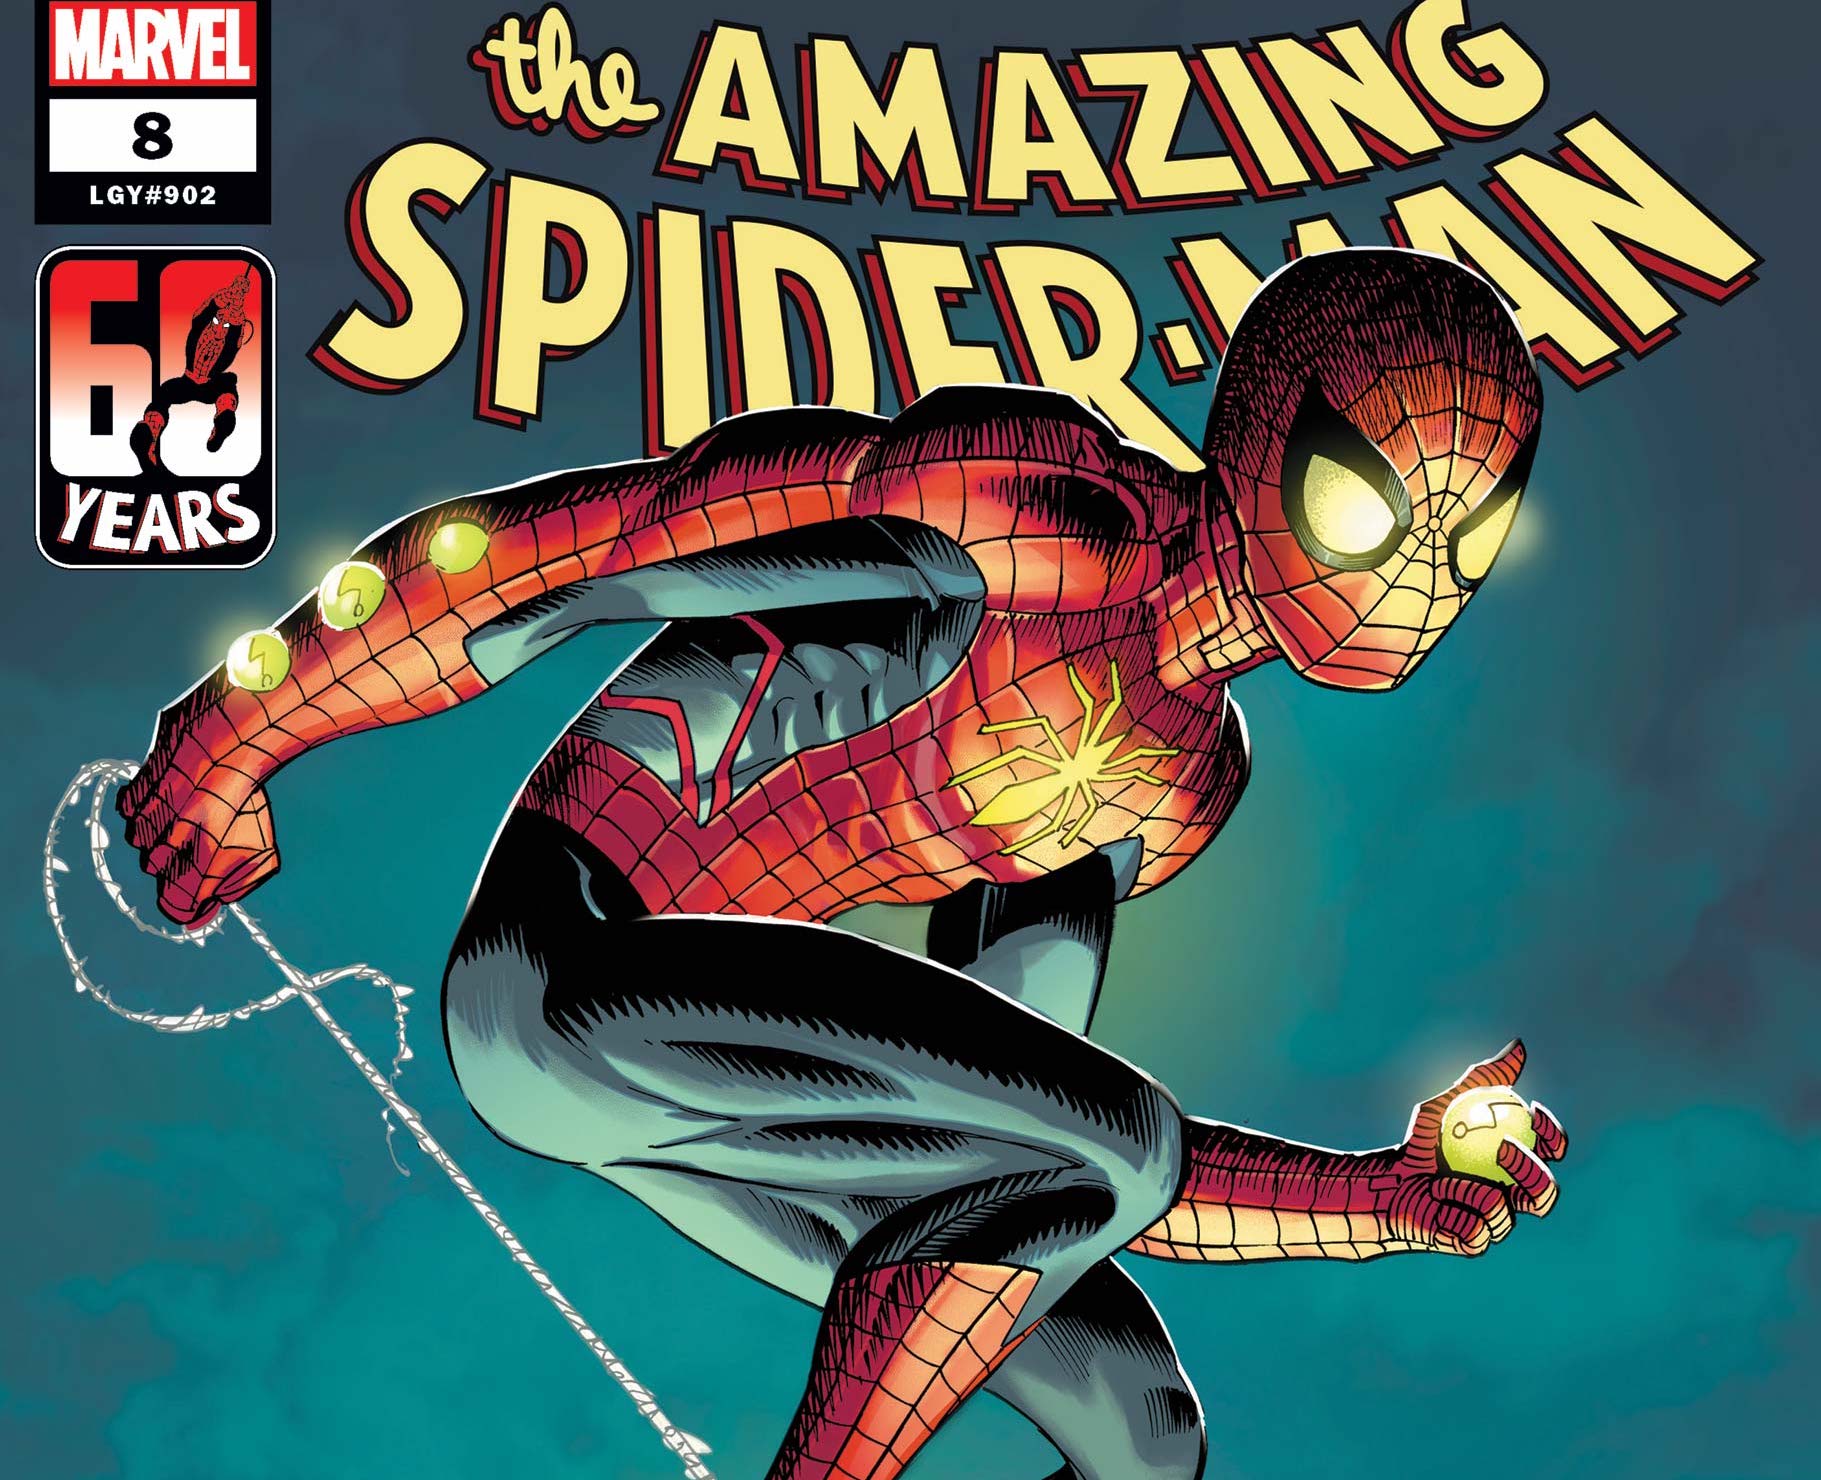 Amazing Spider-Man #8 (LGY #902) review